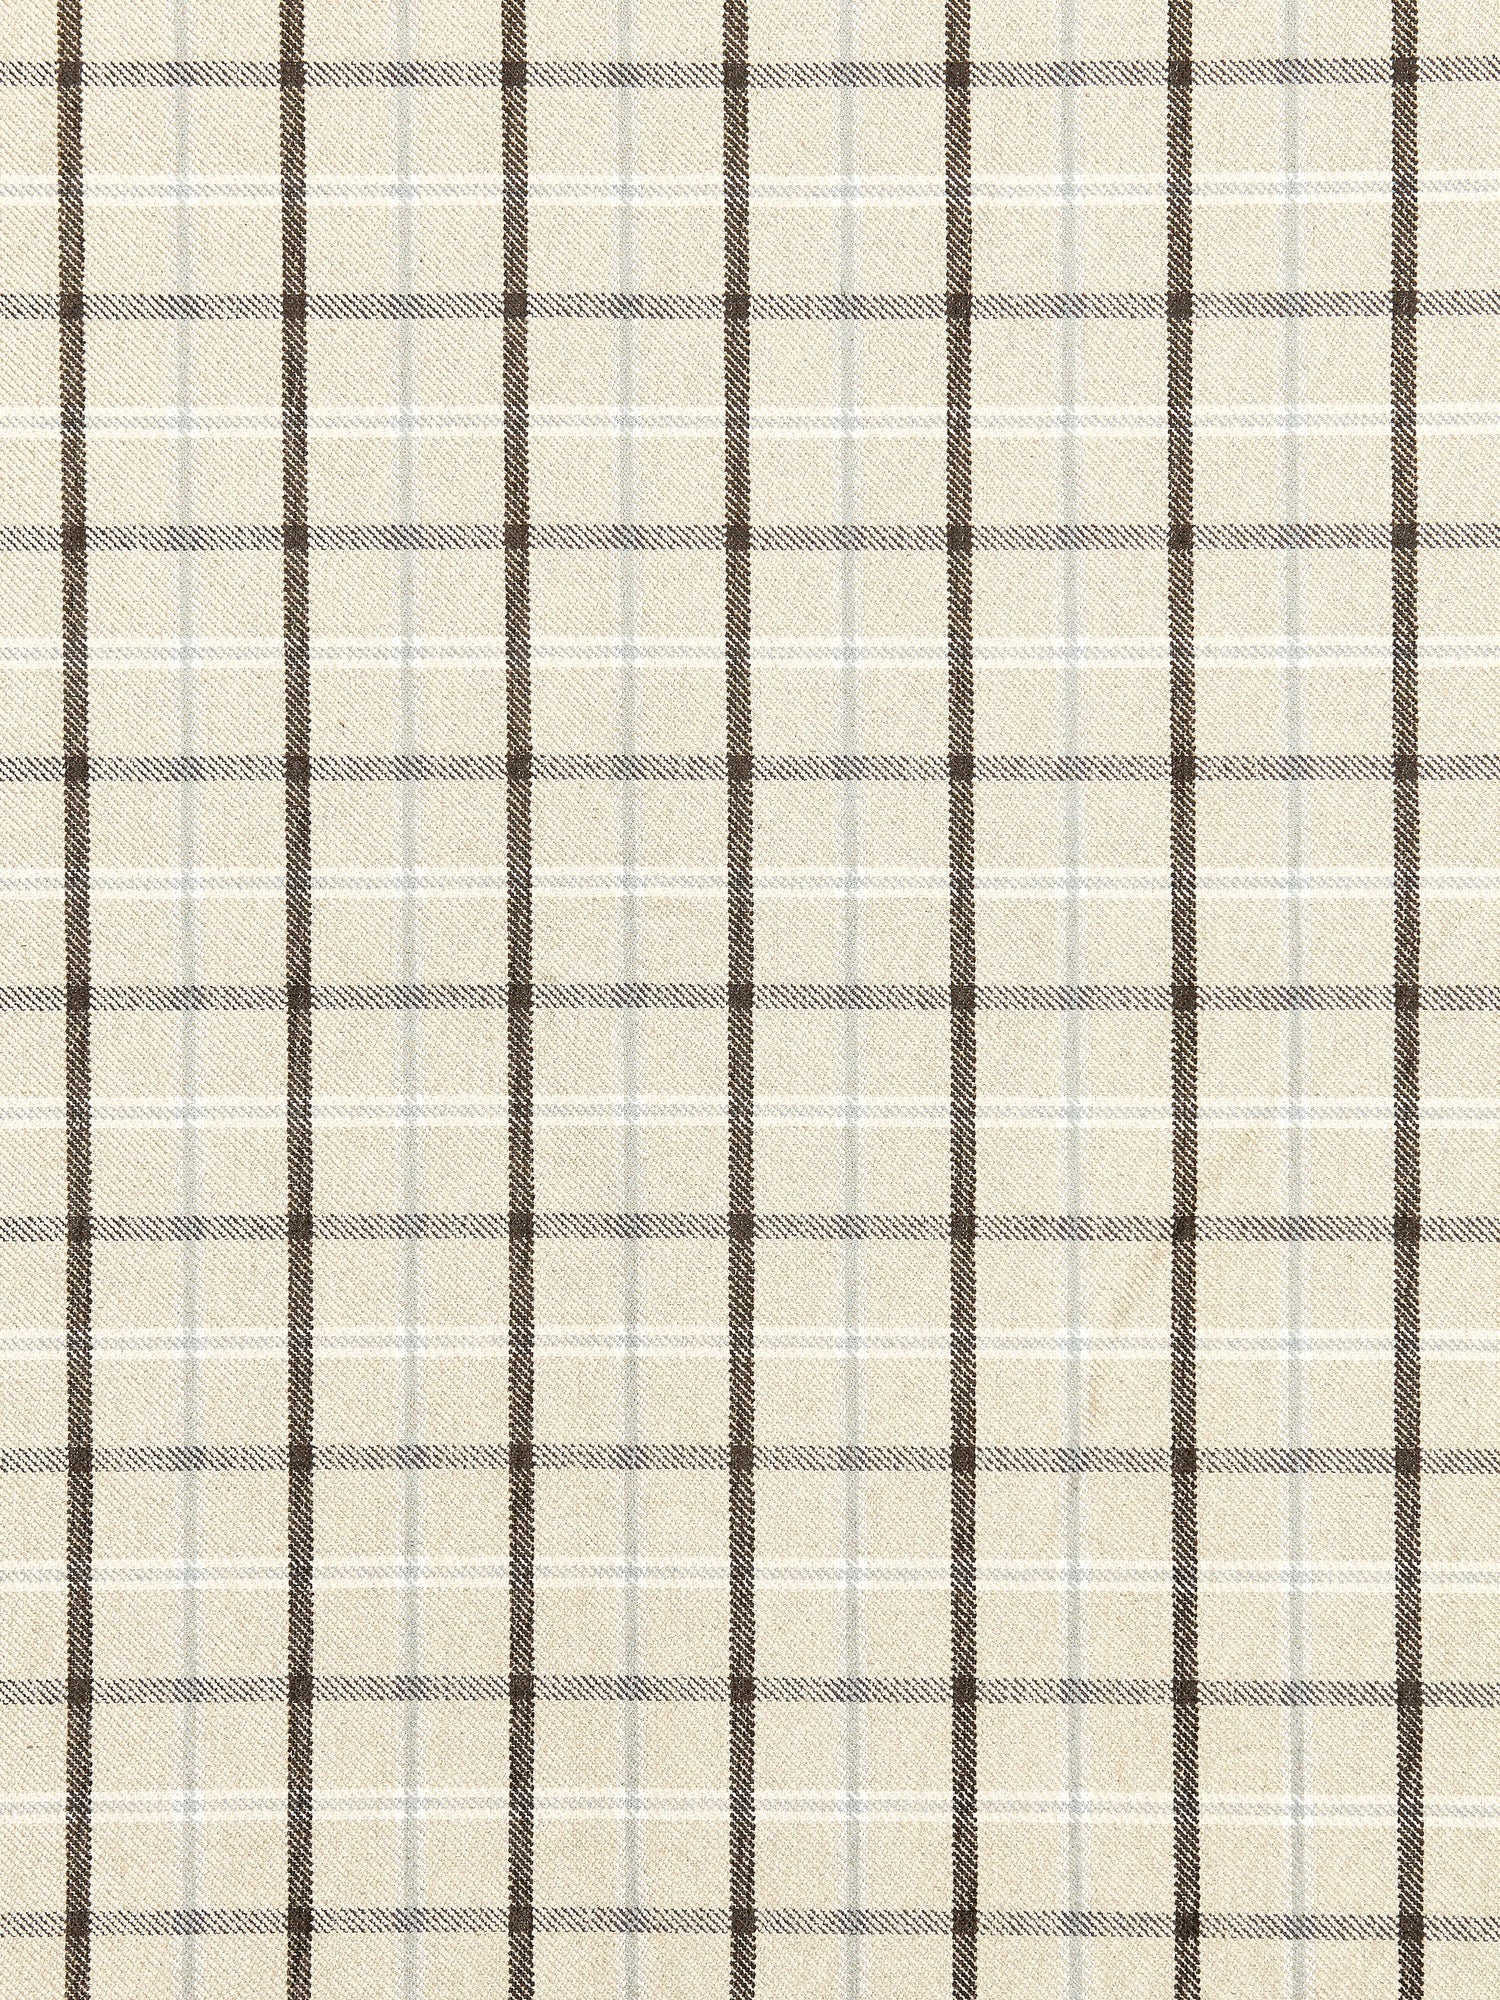 Bristol Plaid fabric in linen color - pattern number SC 000127121 - by Scalamandre in the Scalamandre Fabrics Book 1 collection